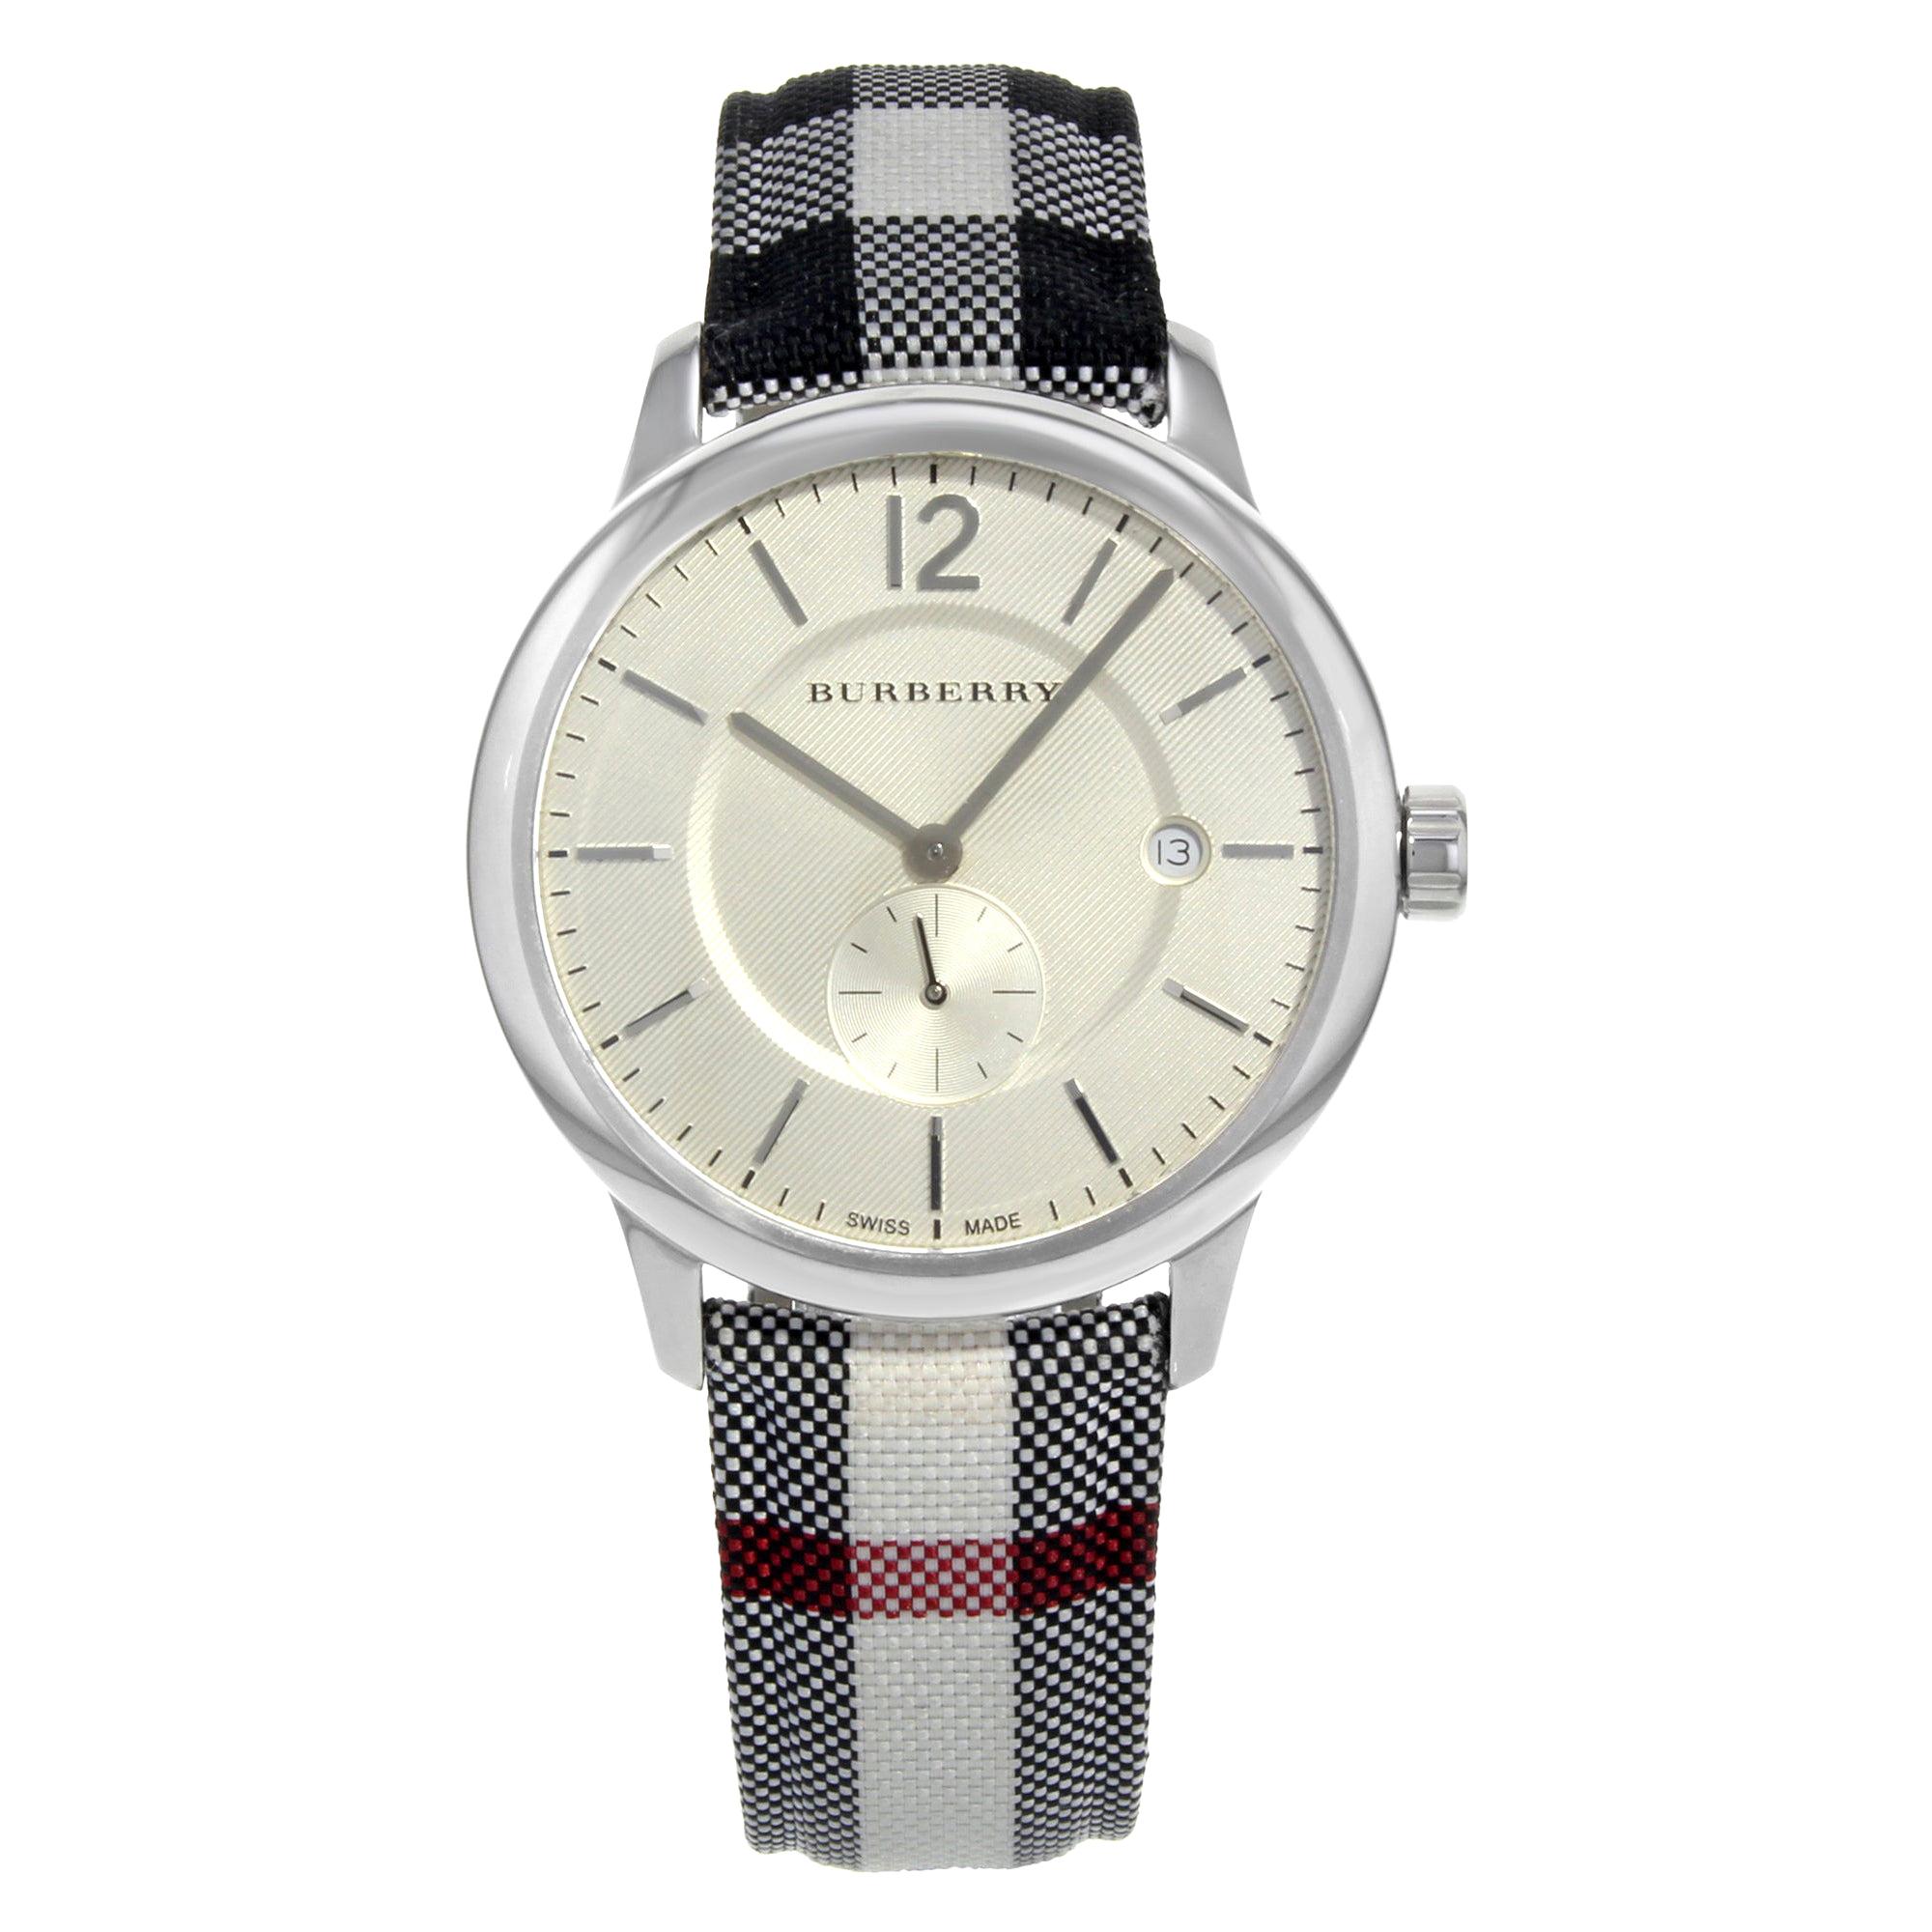 Burberry The Classic Round Silver Dial Steel Quartz Unisex Watch BU10002 For Sale